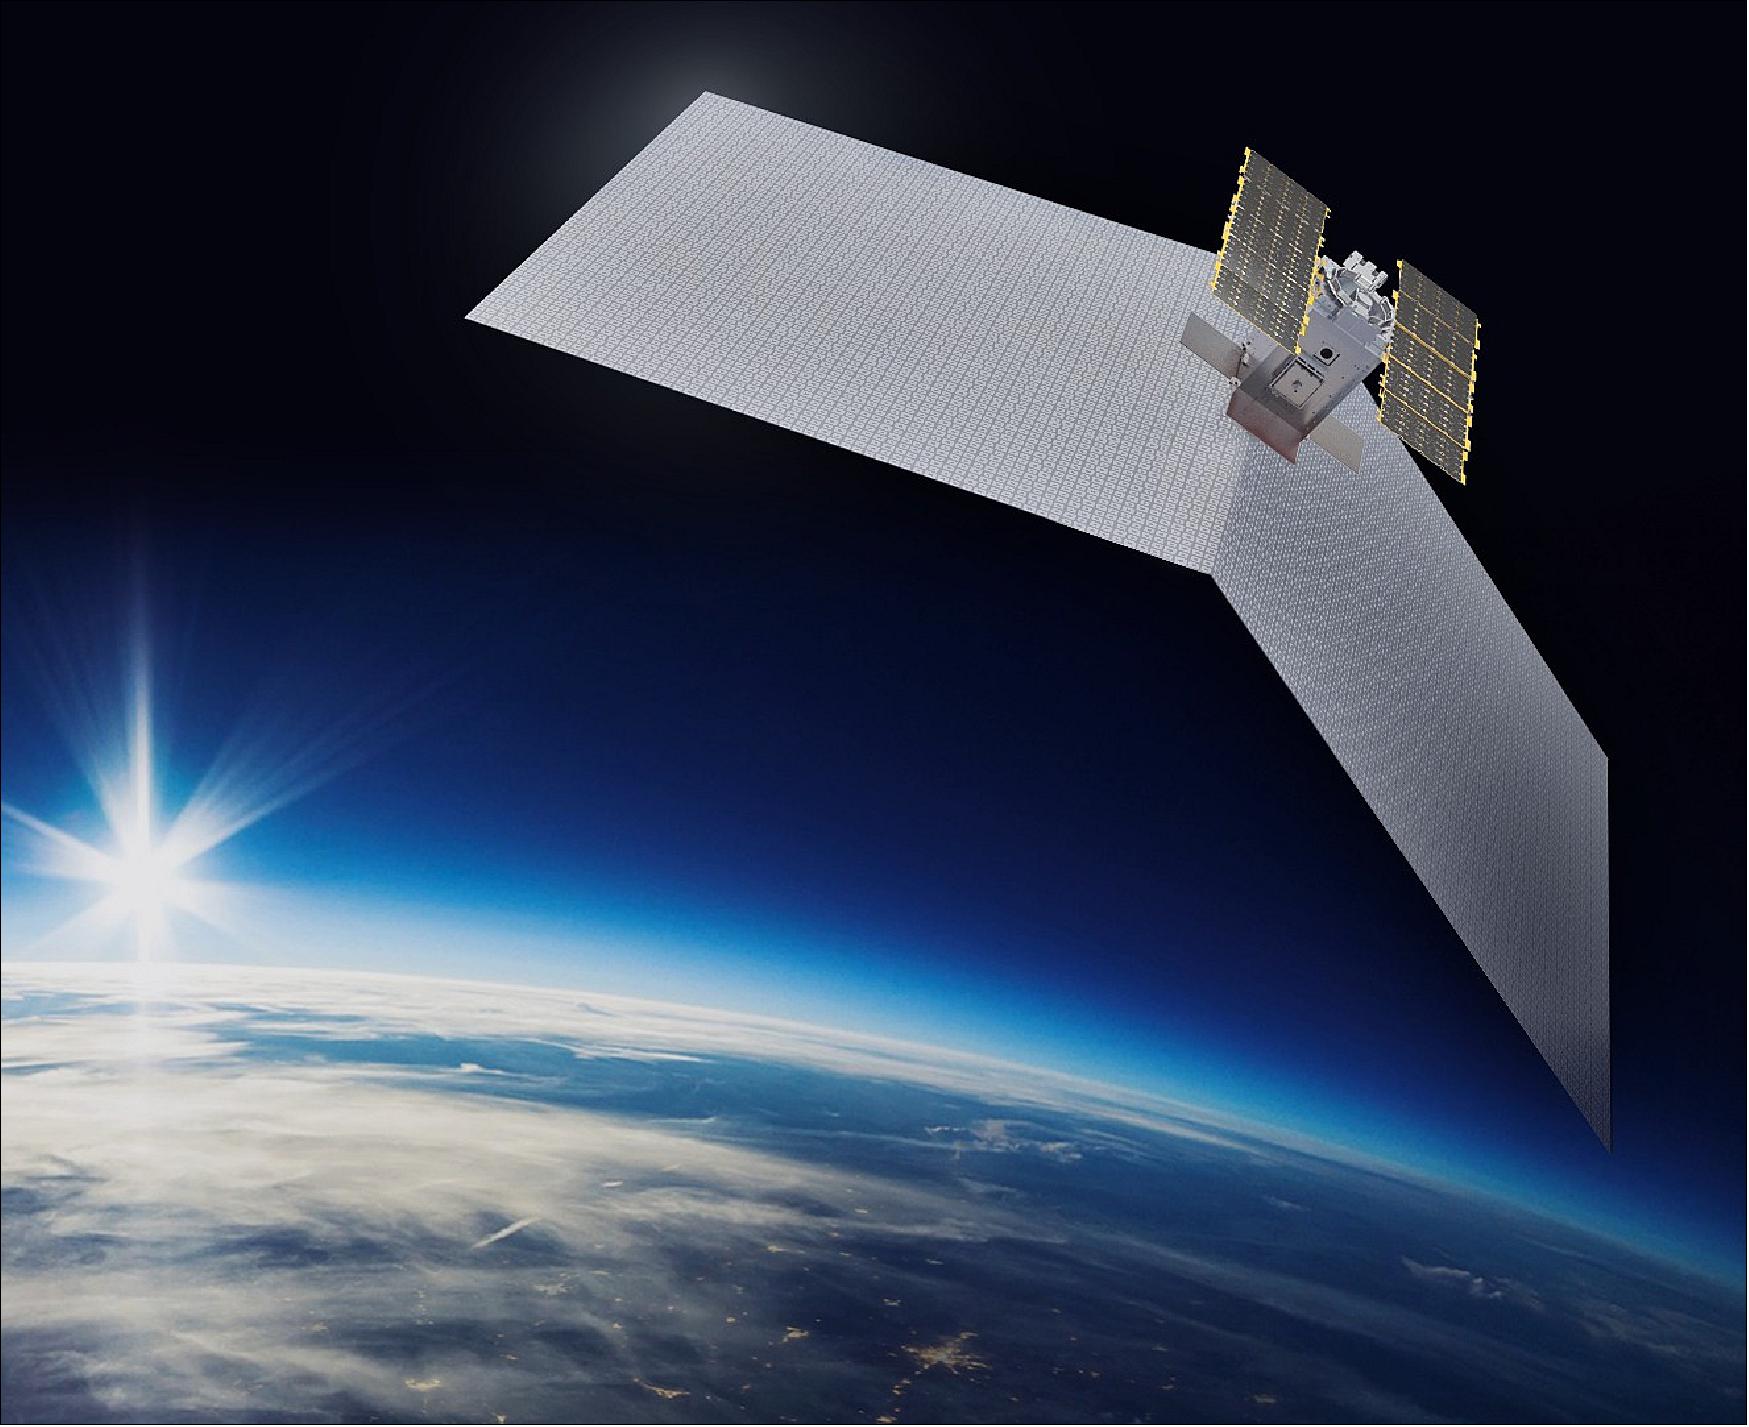 Figure 6: Artist's rendition of the deployed Capella microsatellite. The spacecraft is using an origami-like antenna that unfolds to 8 m2 (image credit: Capella Space) 10)